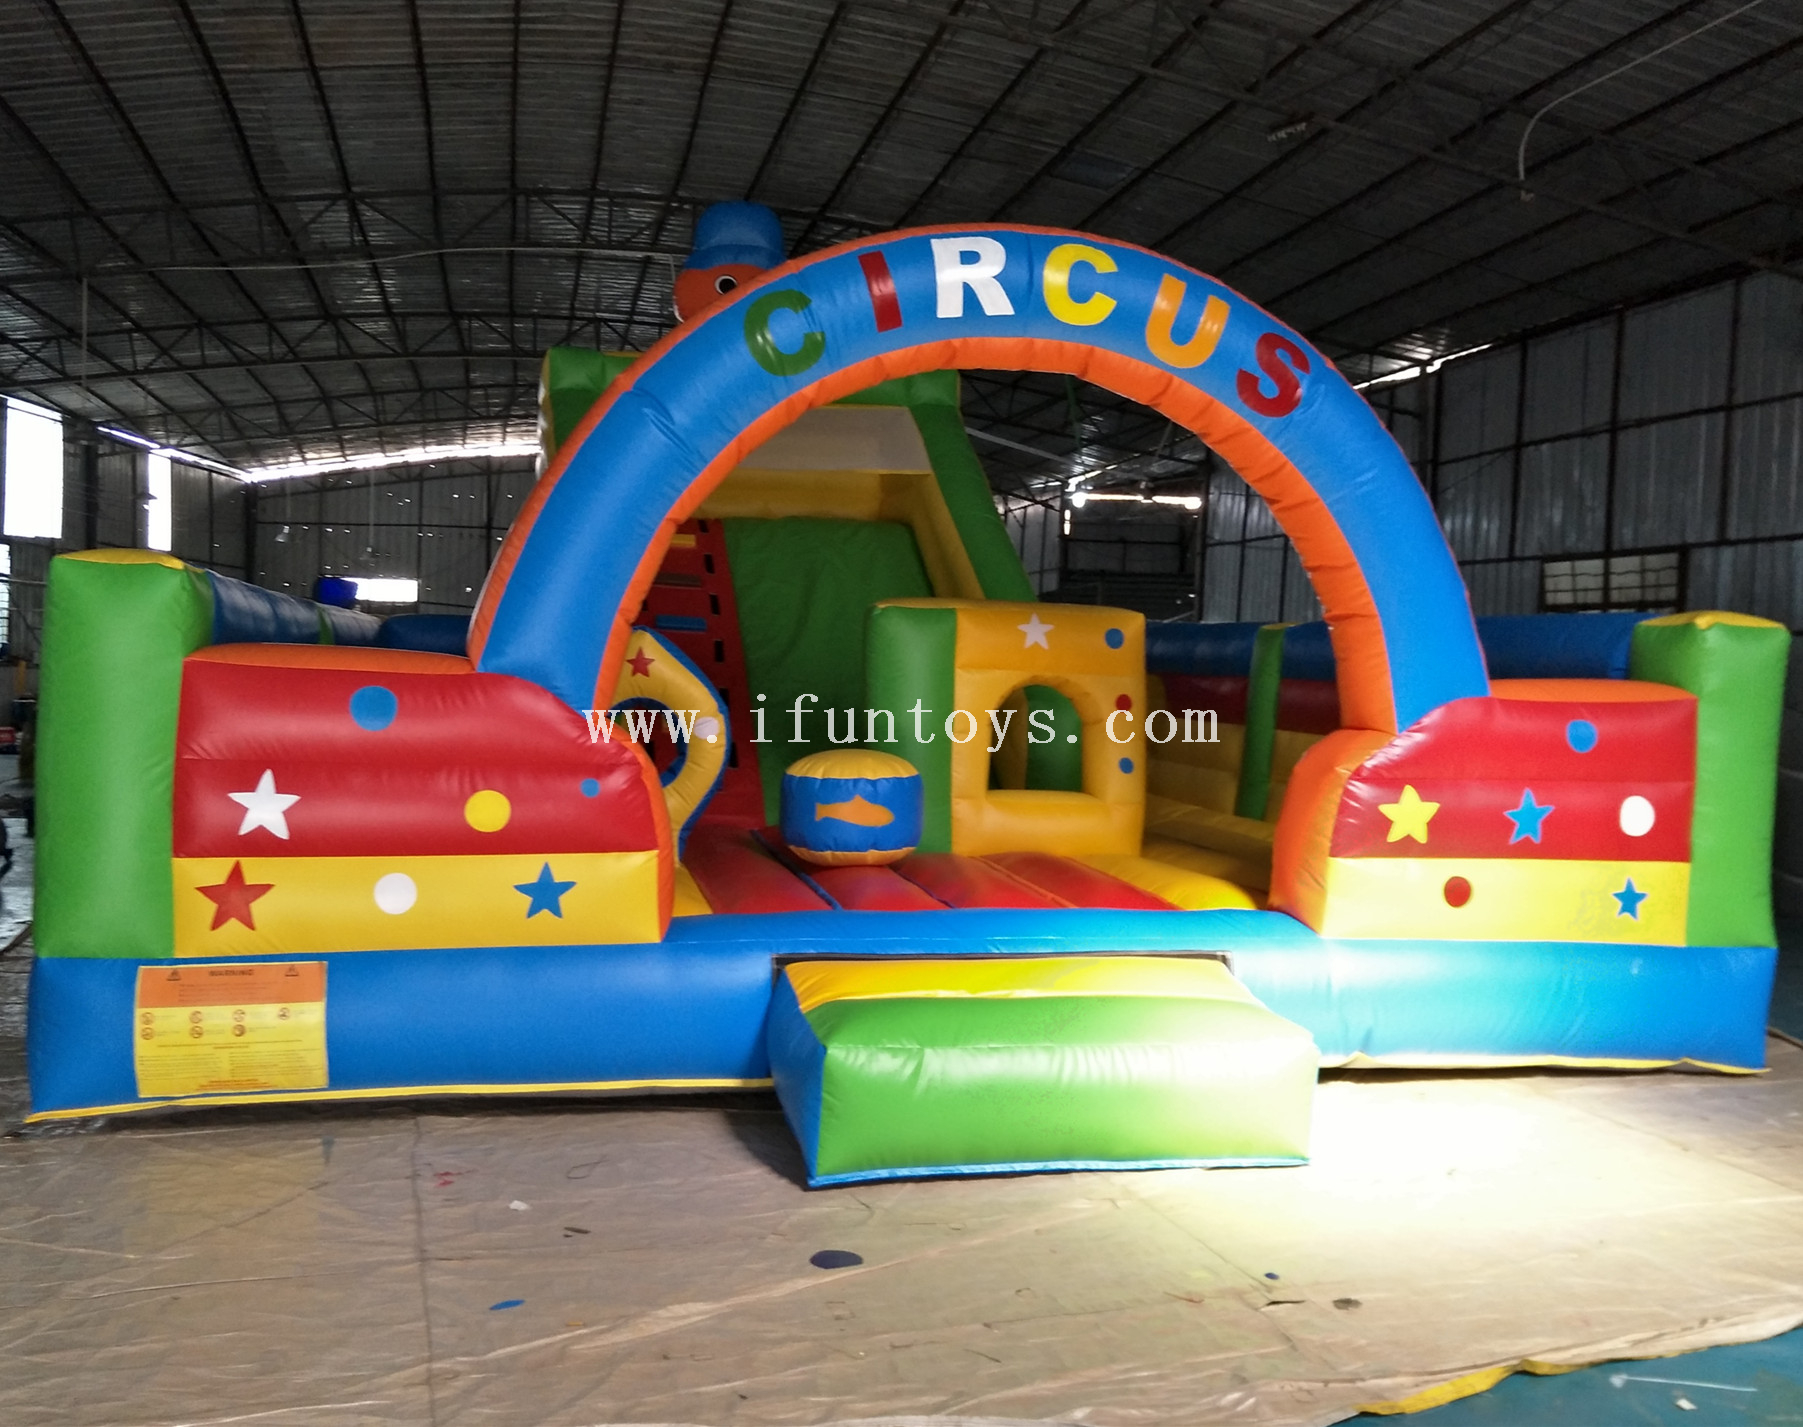 Outdoor inflatable clown fun city/Inflatable clown playground/inflatable Circus jumping castle for kids